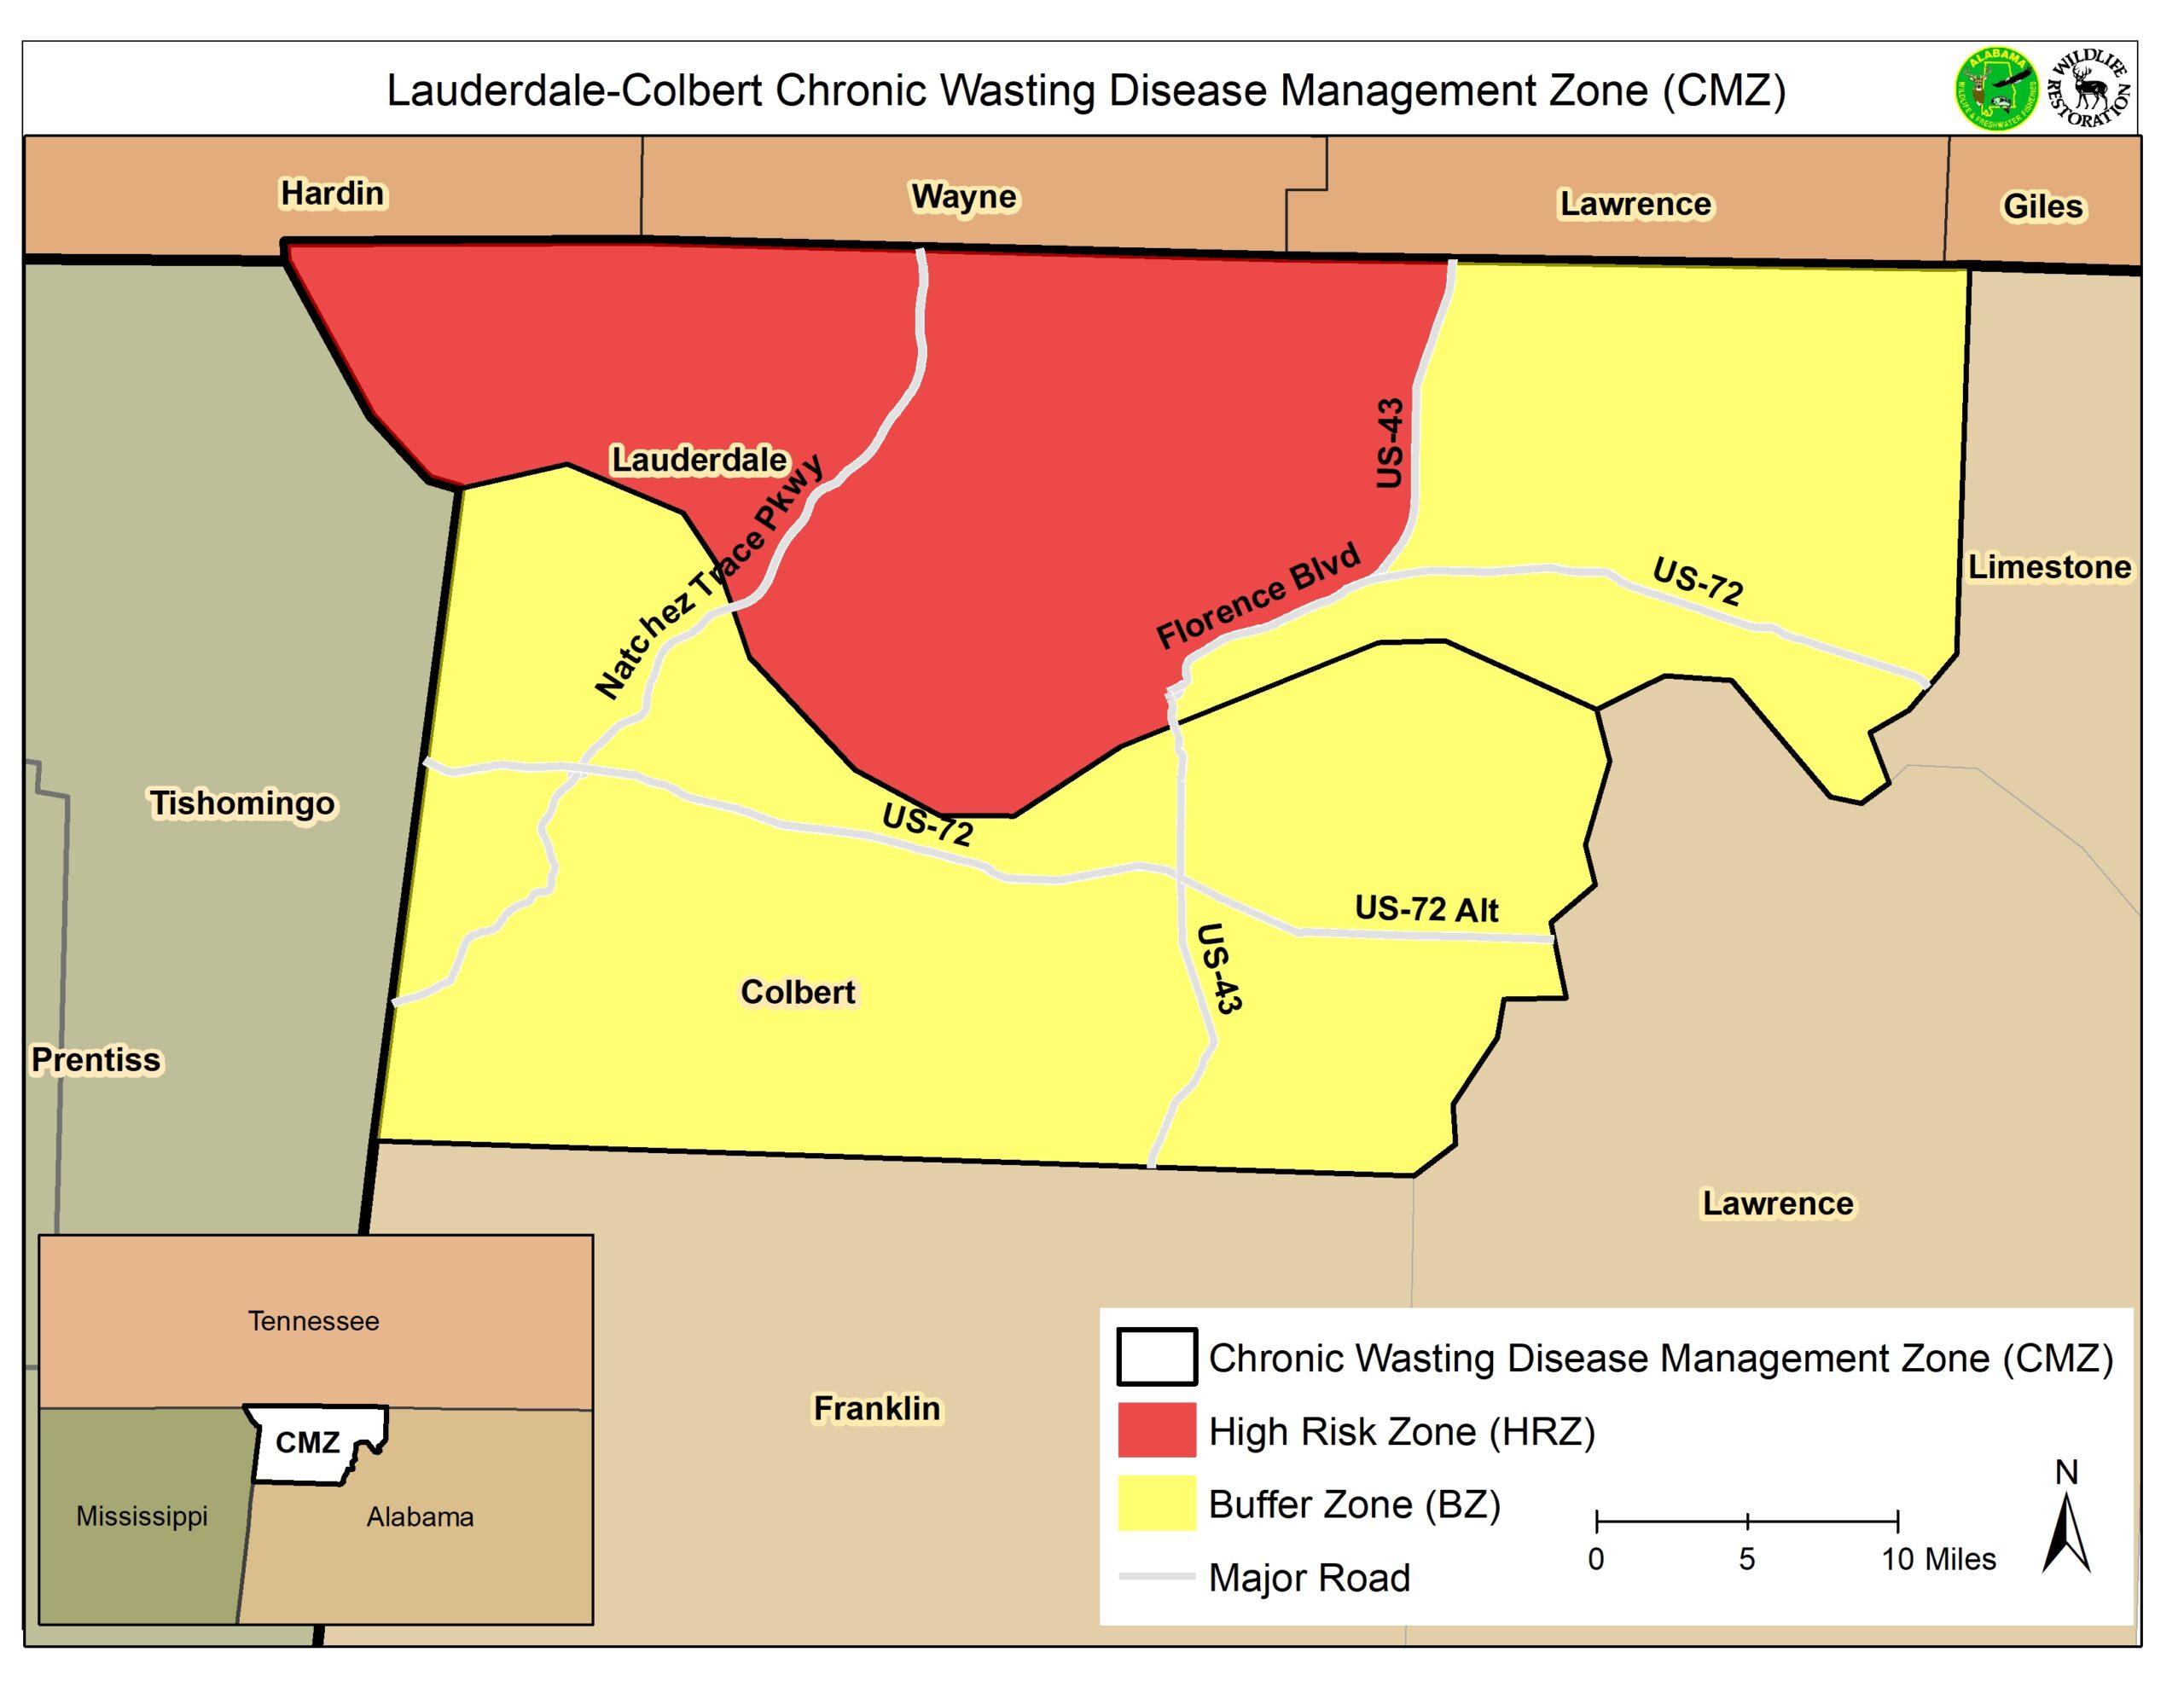 Map of Lauderdale_Colbert CWD Management Zone in Alabama